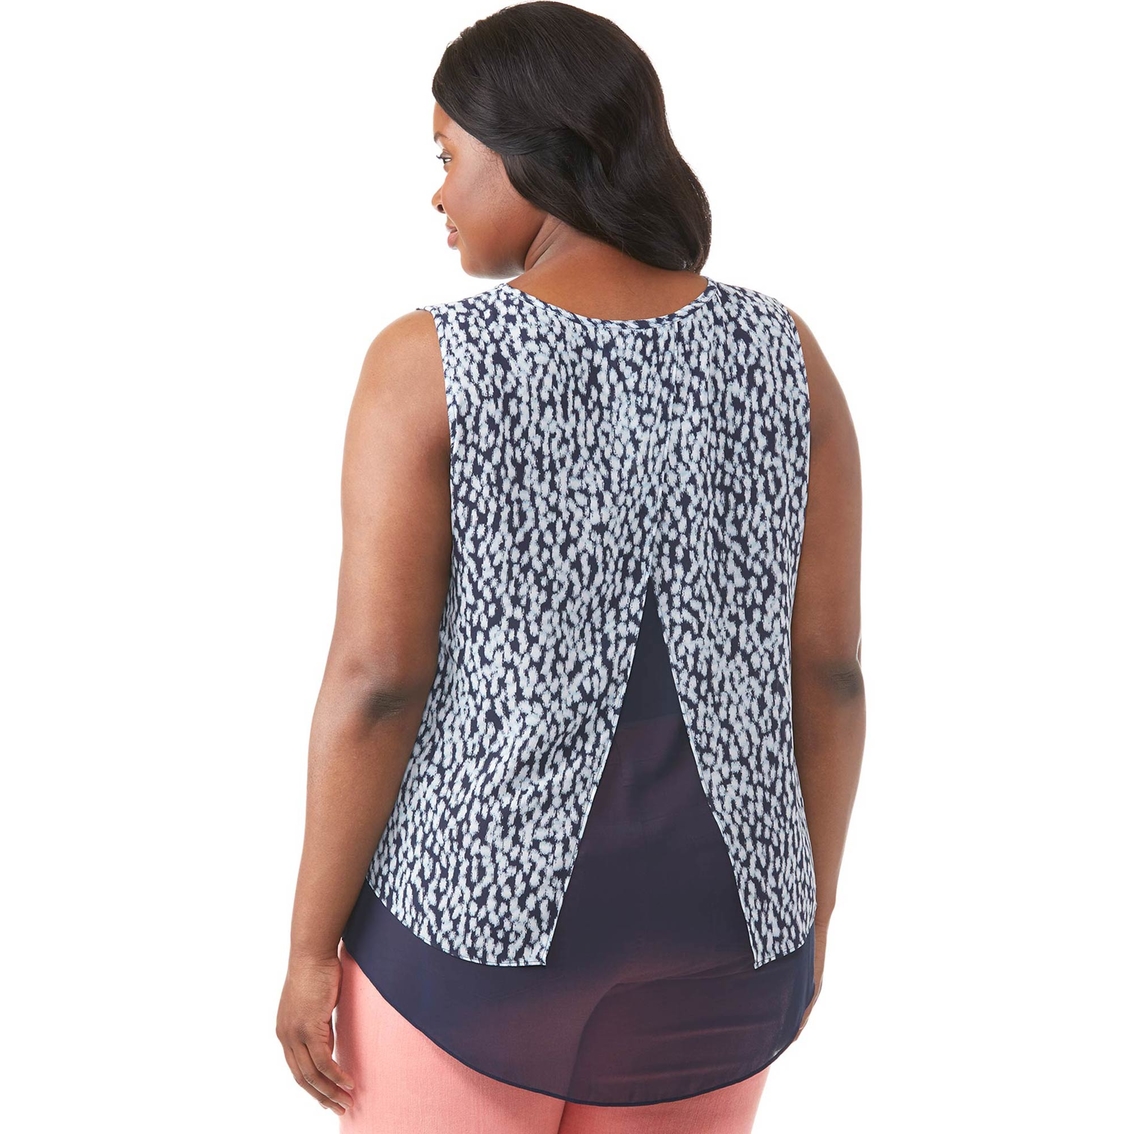 Michael Kors Plus Size Ikat Sleevless Cut Out Top - Image 2 of 2